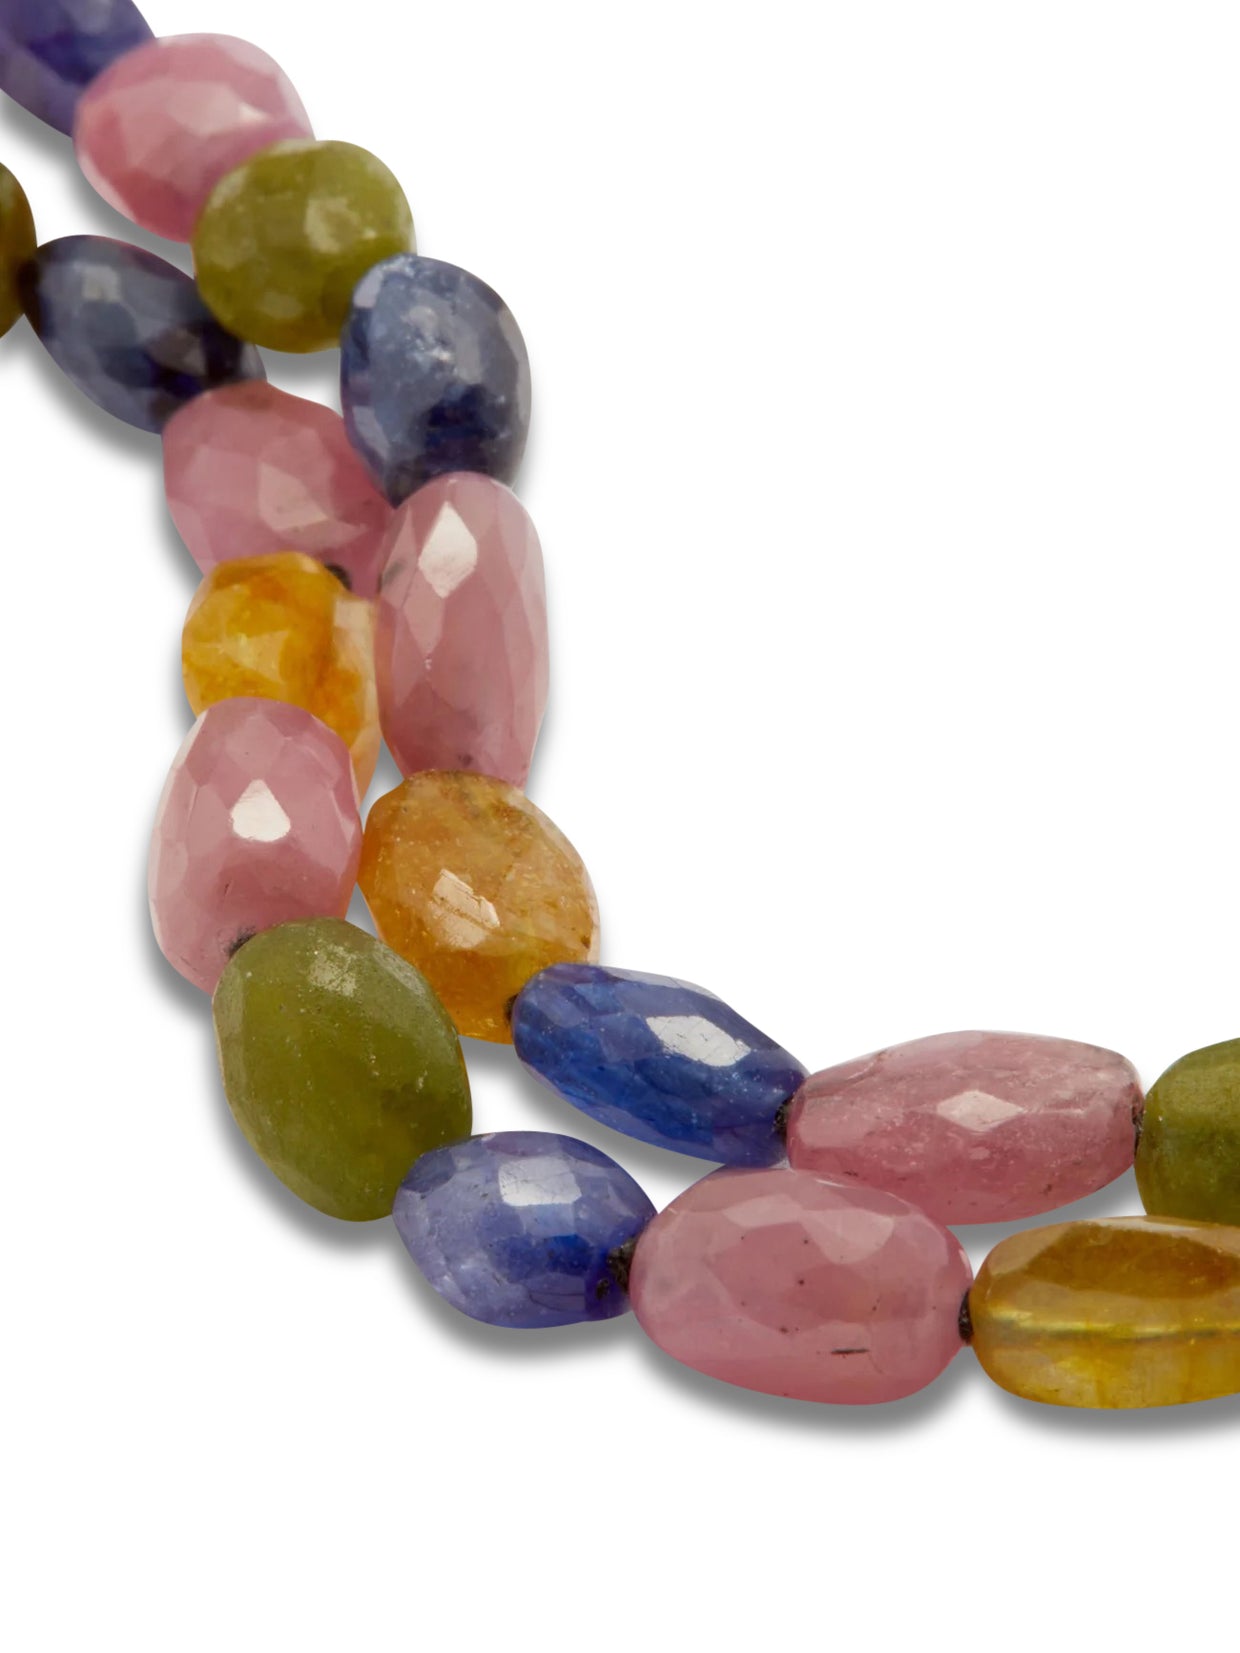 Arizona Rainbow Sapphire Faceted Candy Necklace